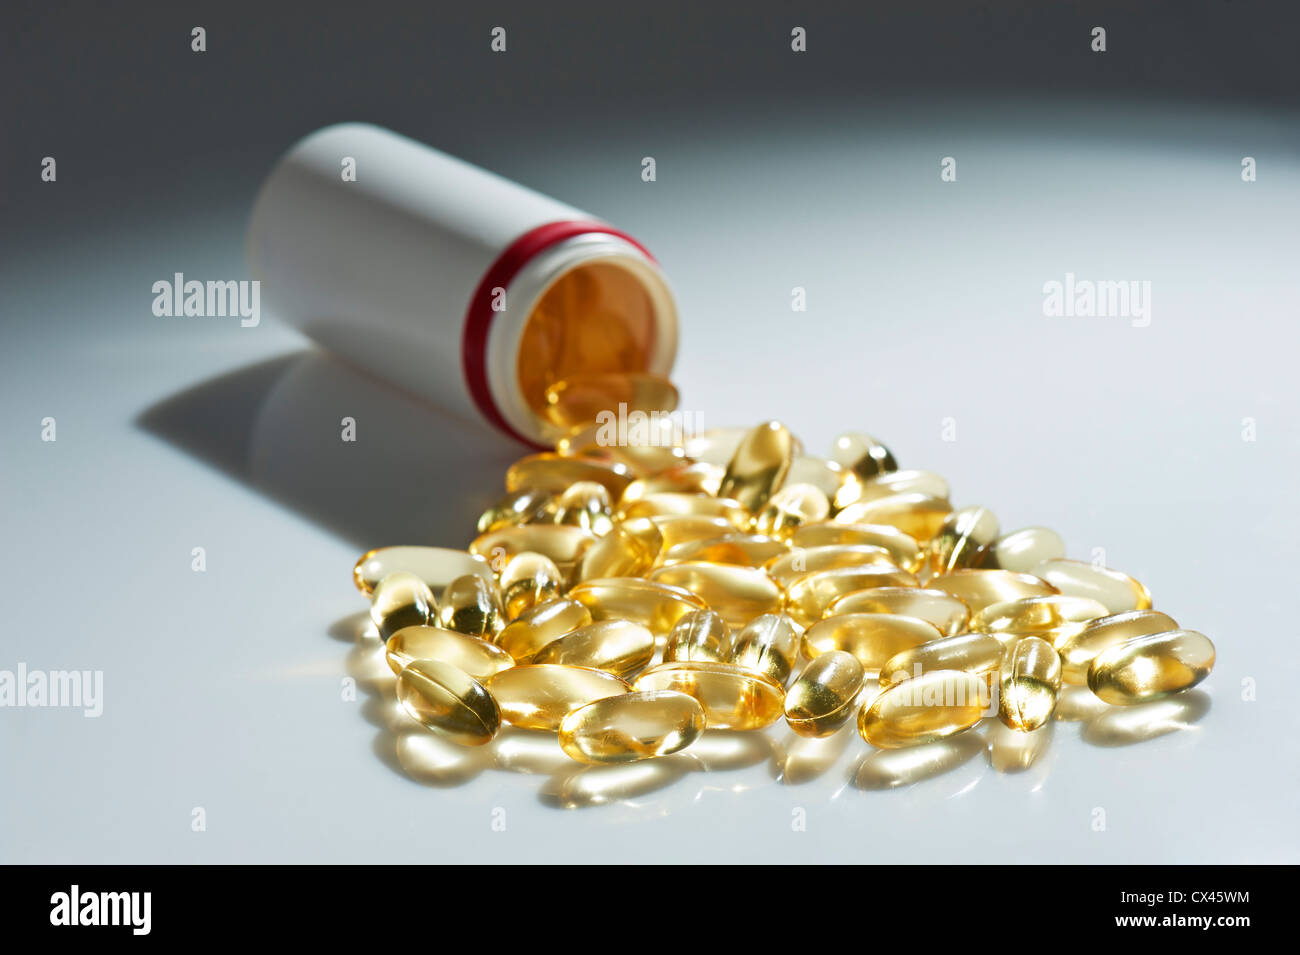 Tablets pipe with undistributed clear capsule isolated Stock Photo